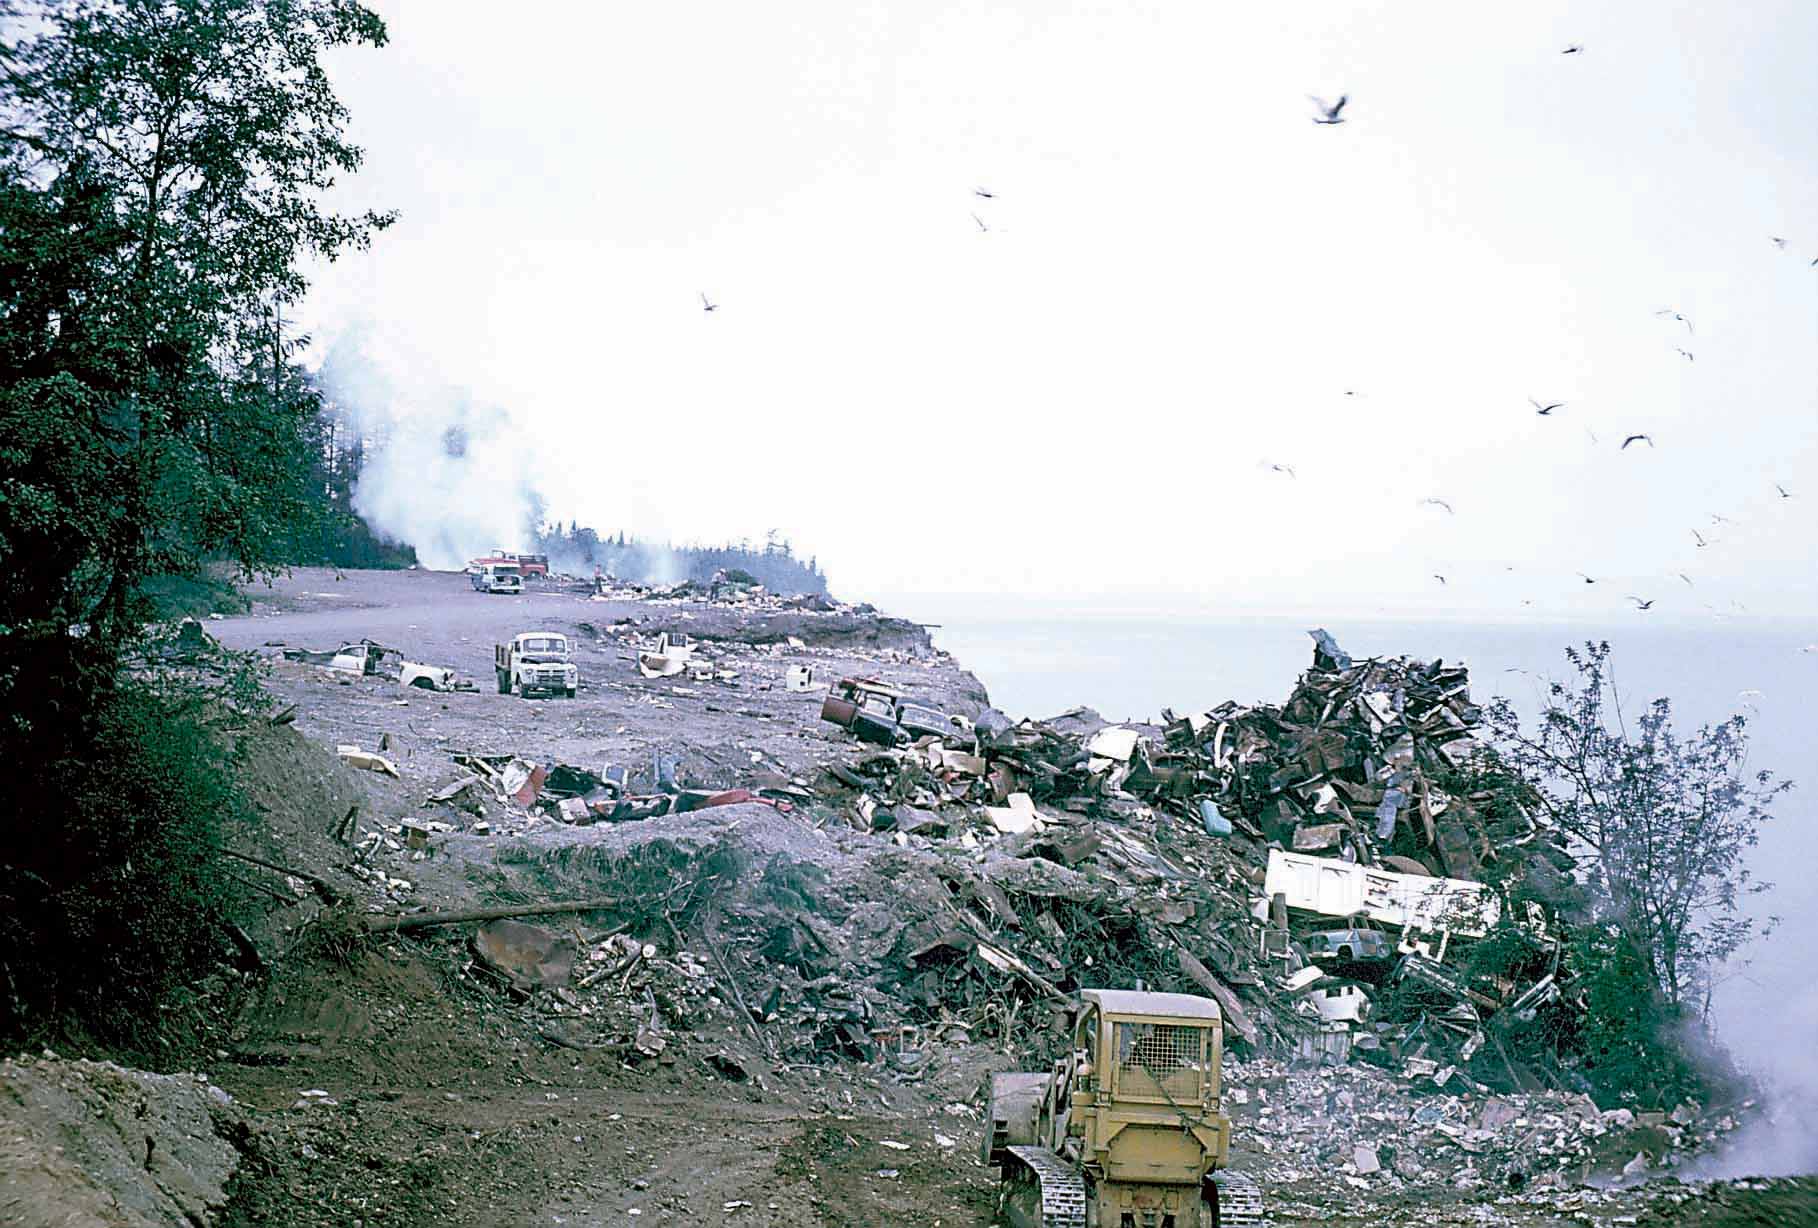 Photo circa 1960 from Port Angeles city archives show a bulldozer pushing trash over the bluff onto the Strait of Juan de Fuca beach below.